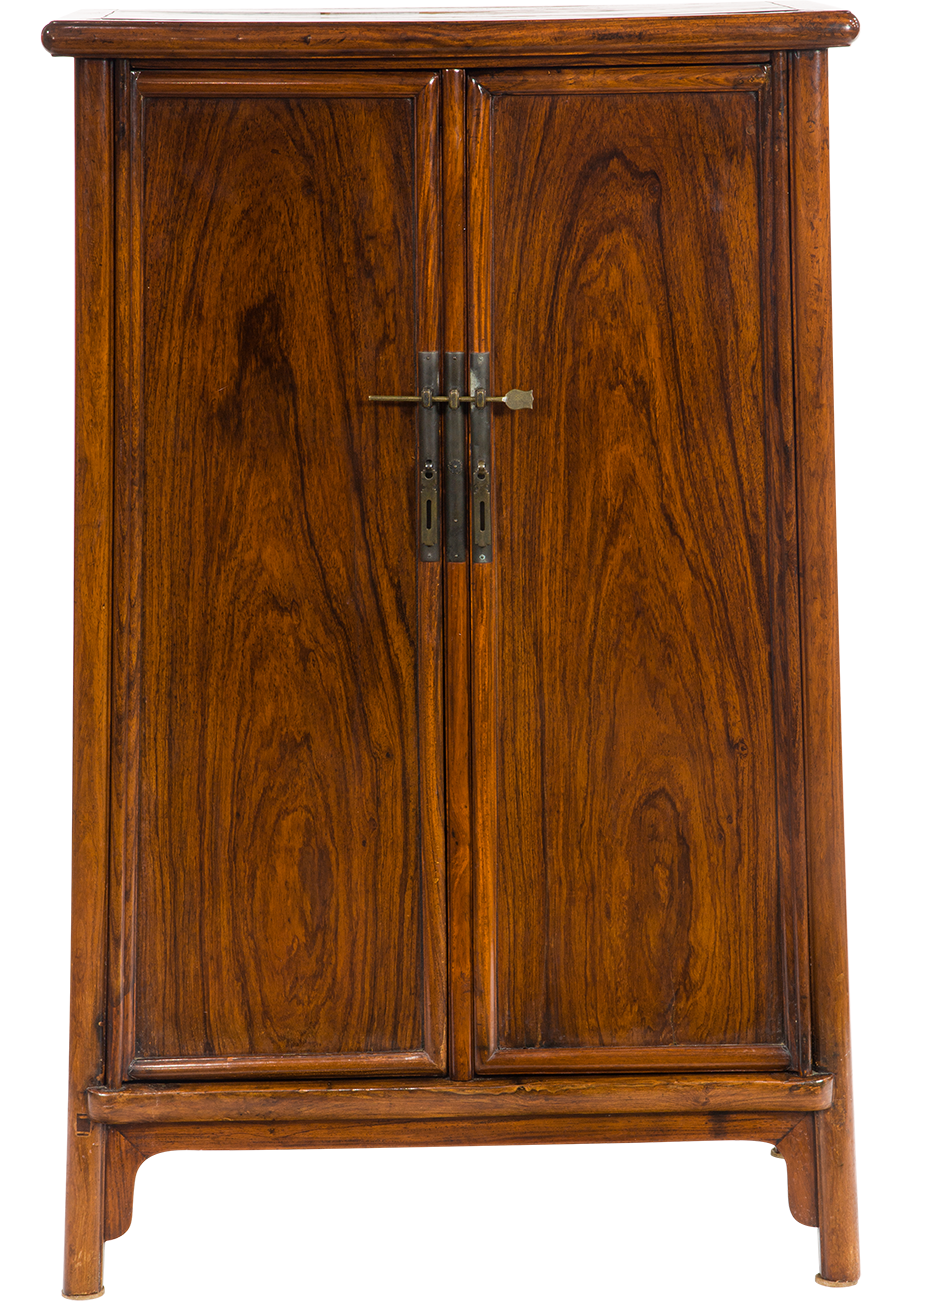 Chinese huanghuali tapered cabinet. Provenance: Acquired in Hong Kong, 1989. Sold: $25,000